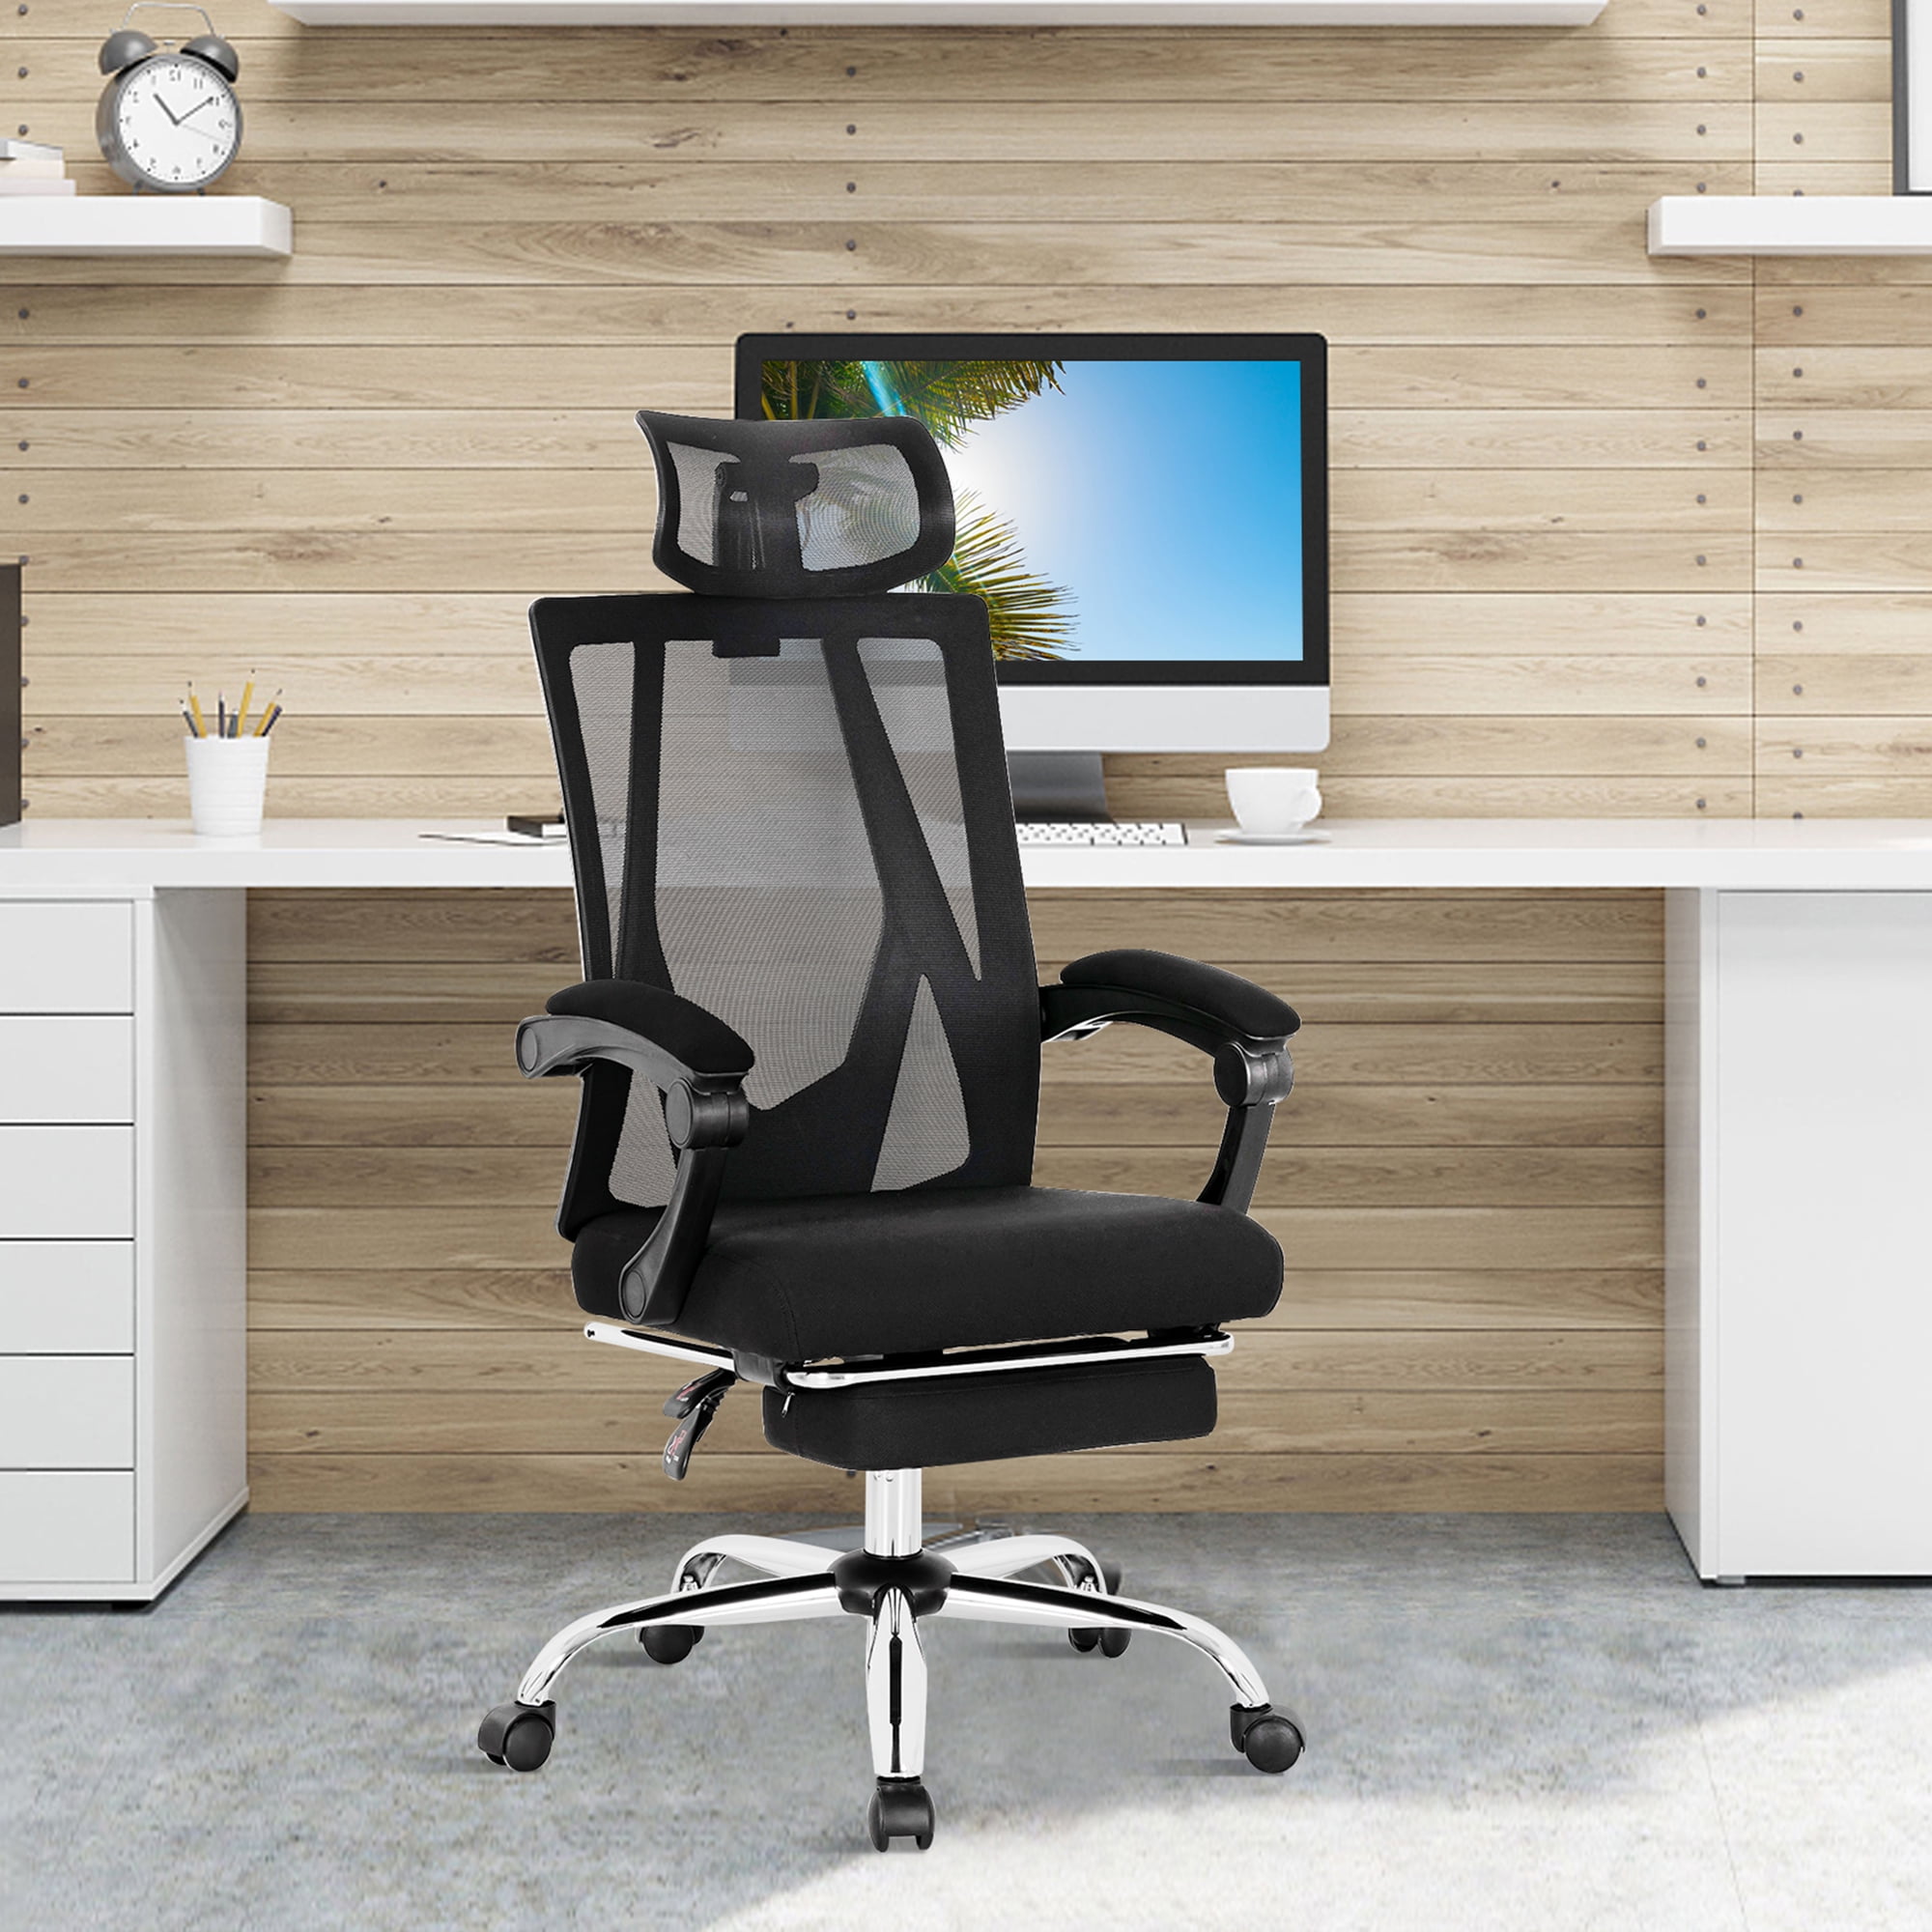 Gymax Reclining Mesh Office Swivel Chair w/ Adjustable Lumbar Support 